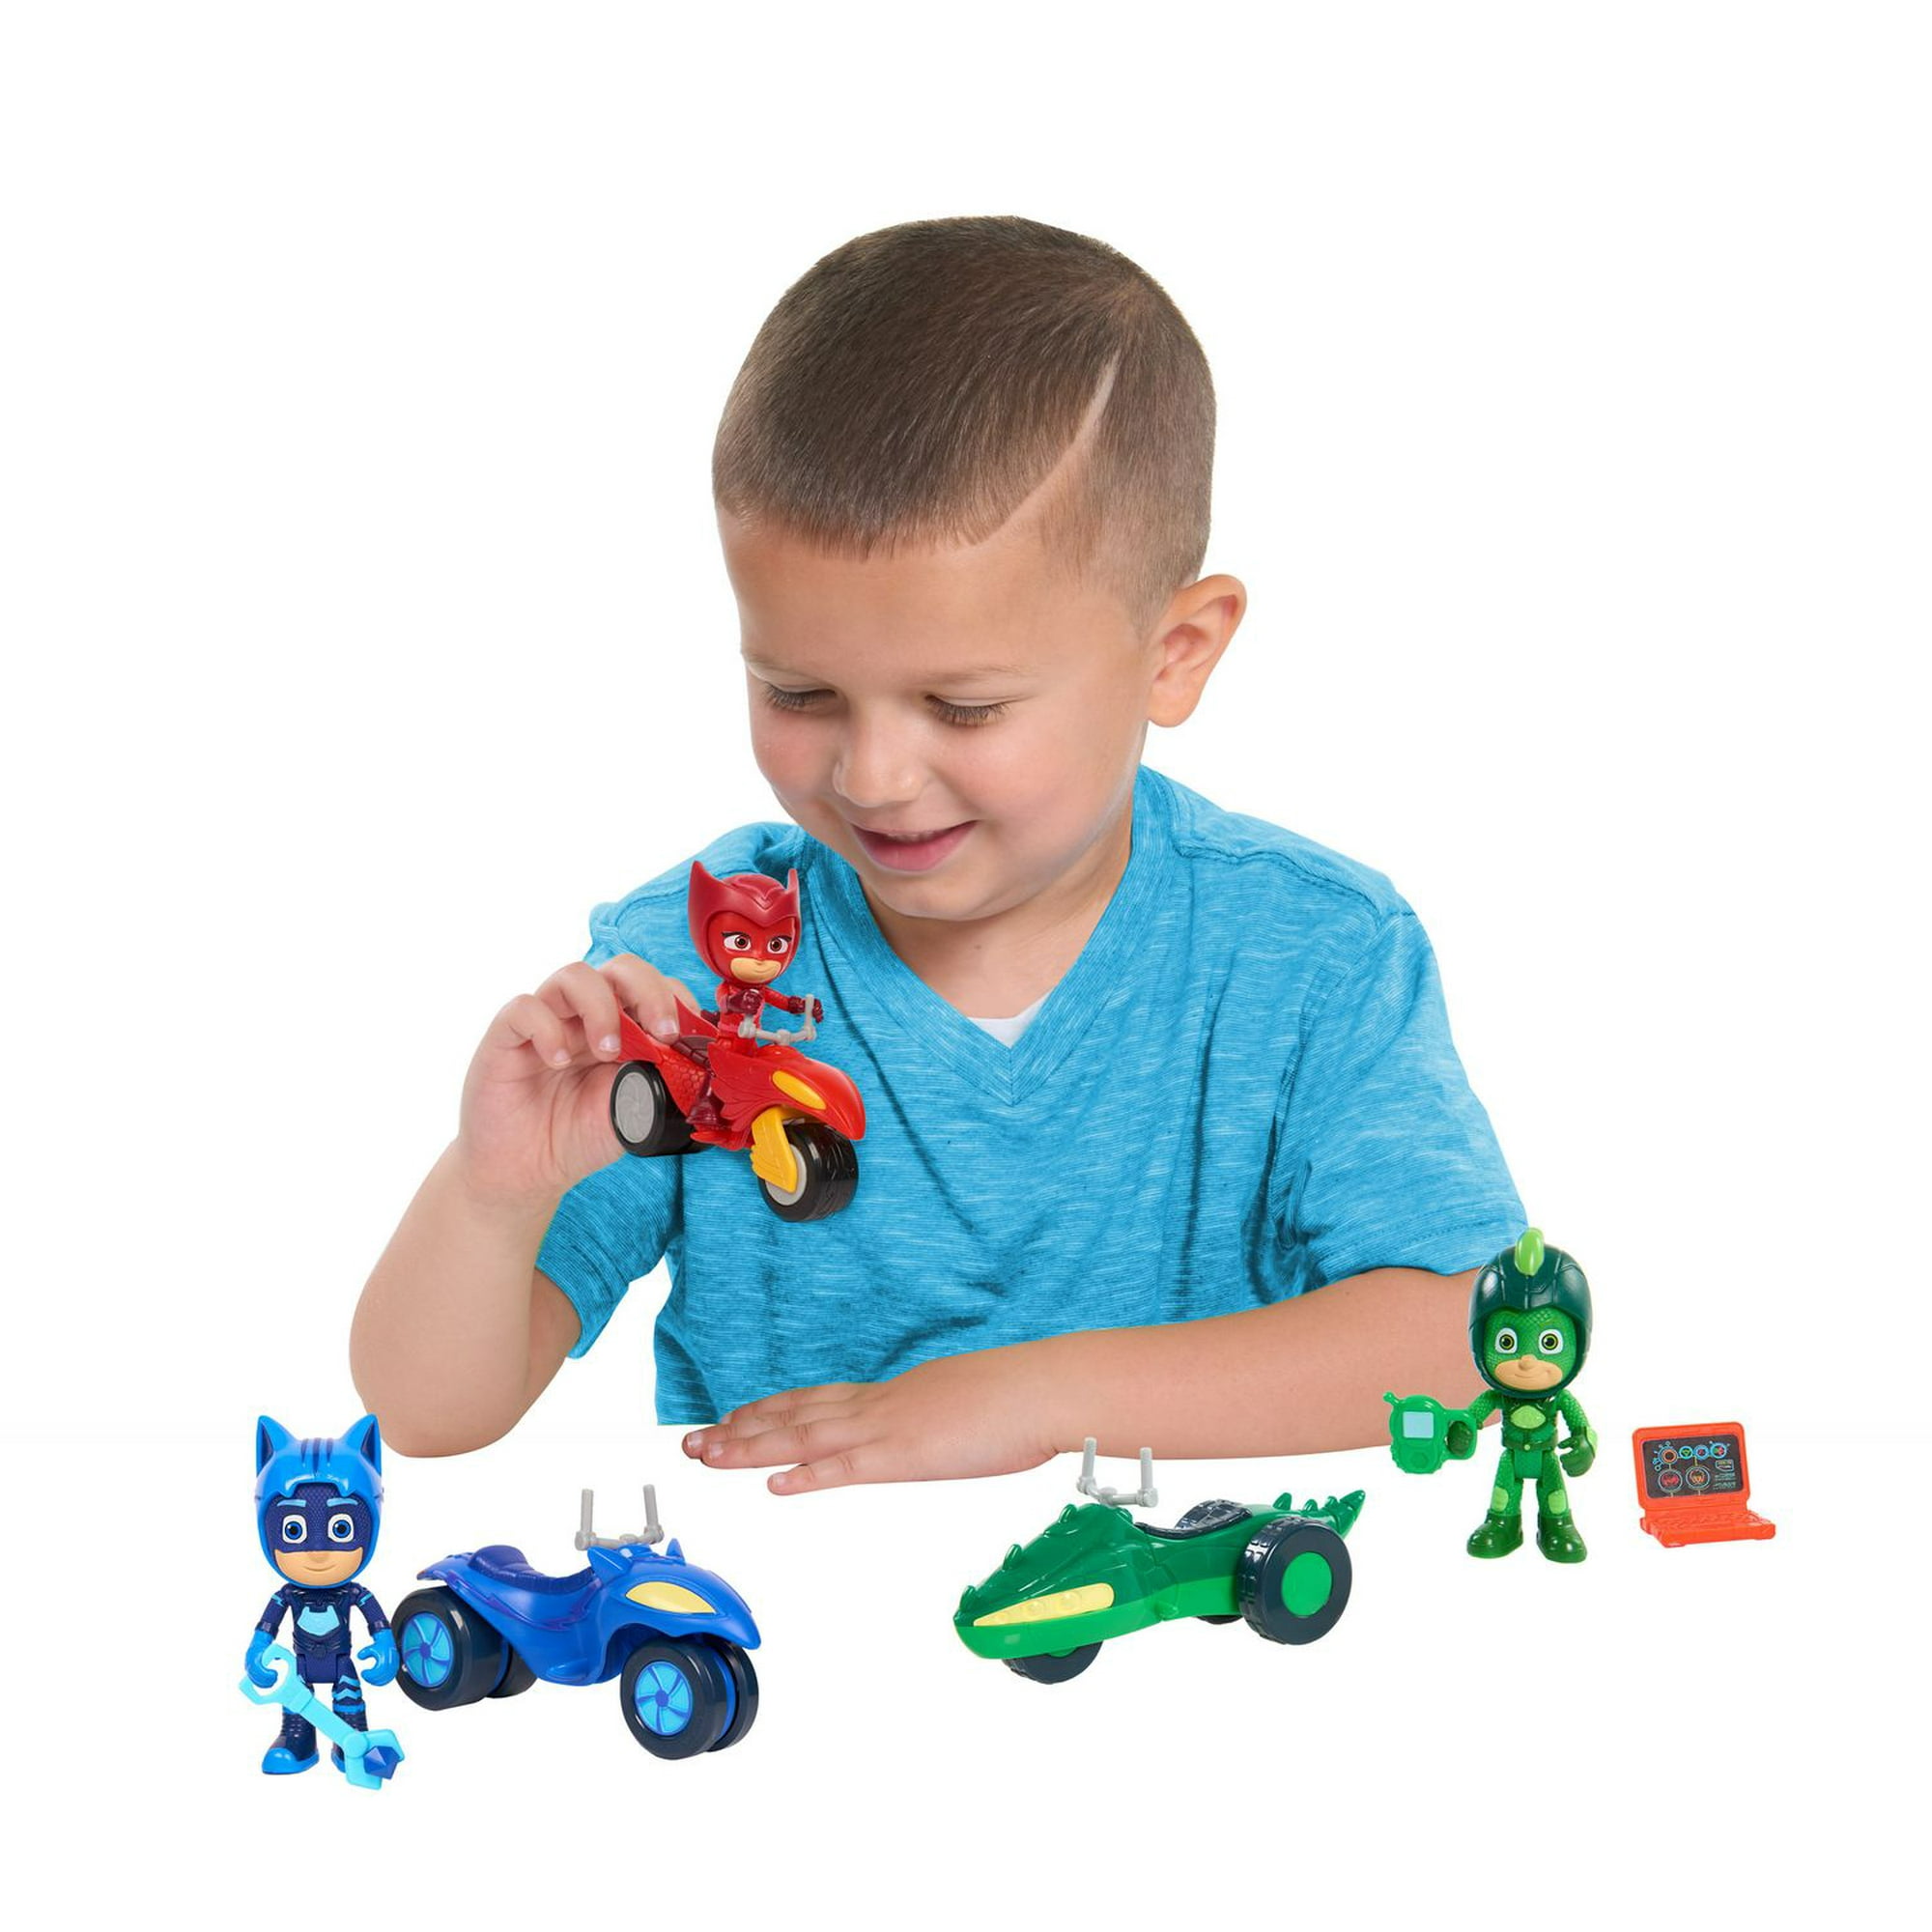 Robots, Rockets And Rovers: New Characters And Electronic Play For PJ Masks  Fans